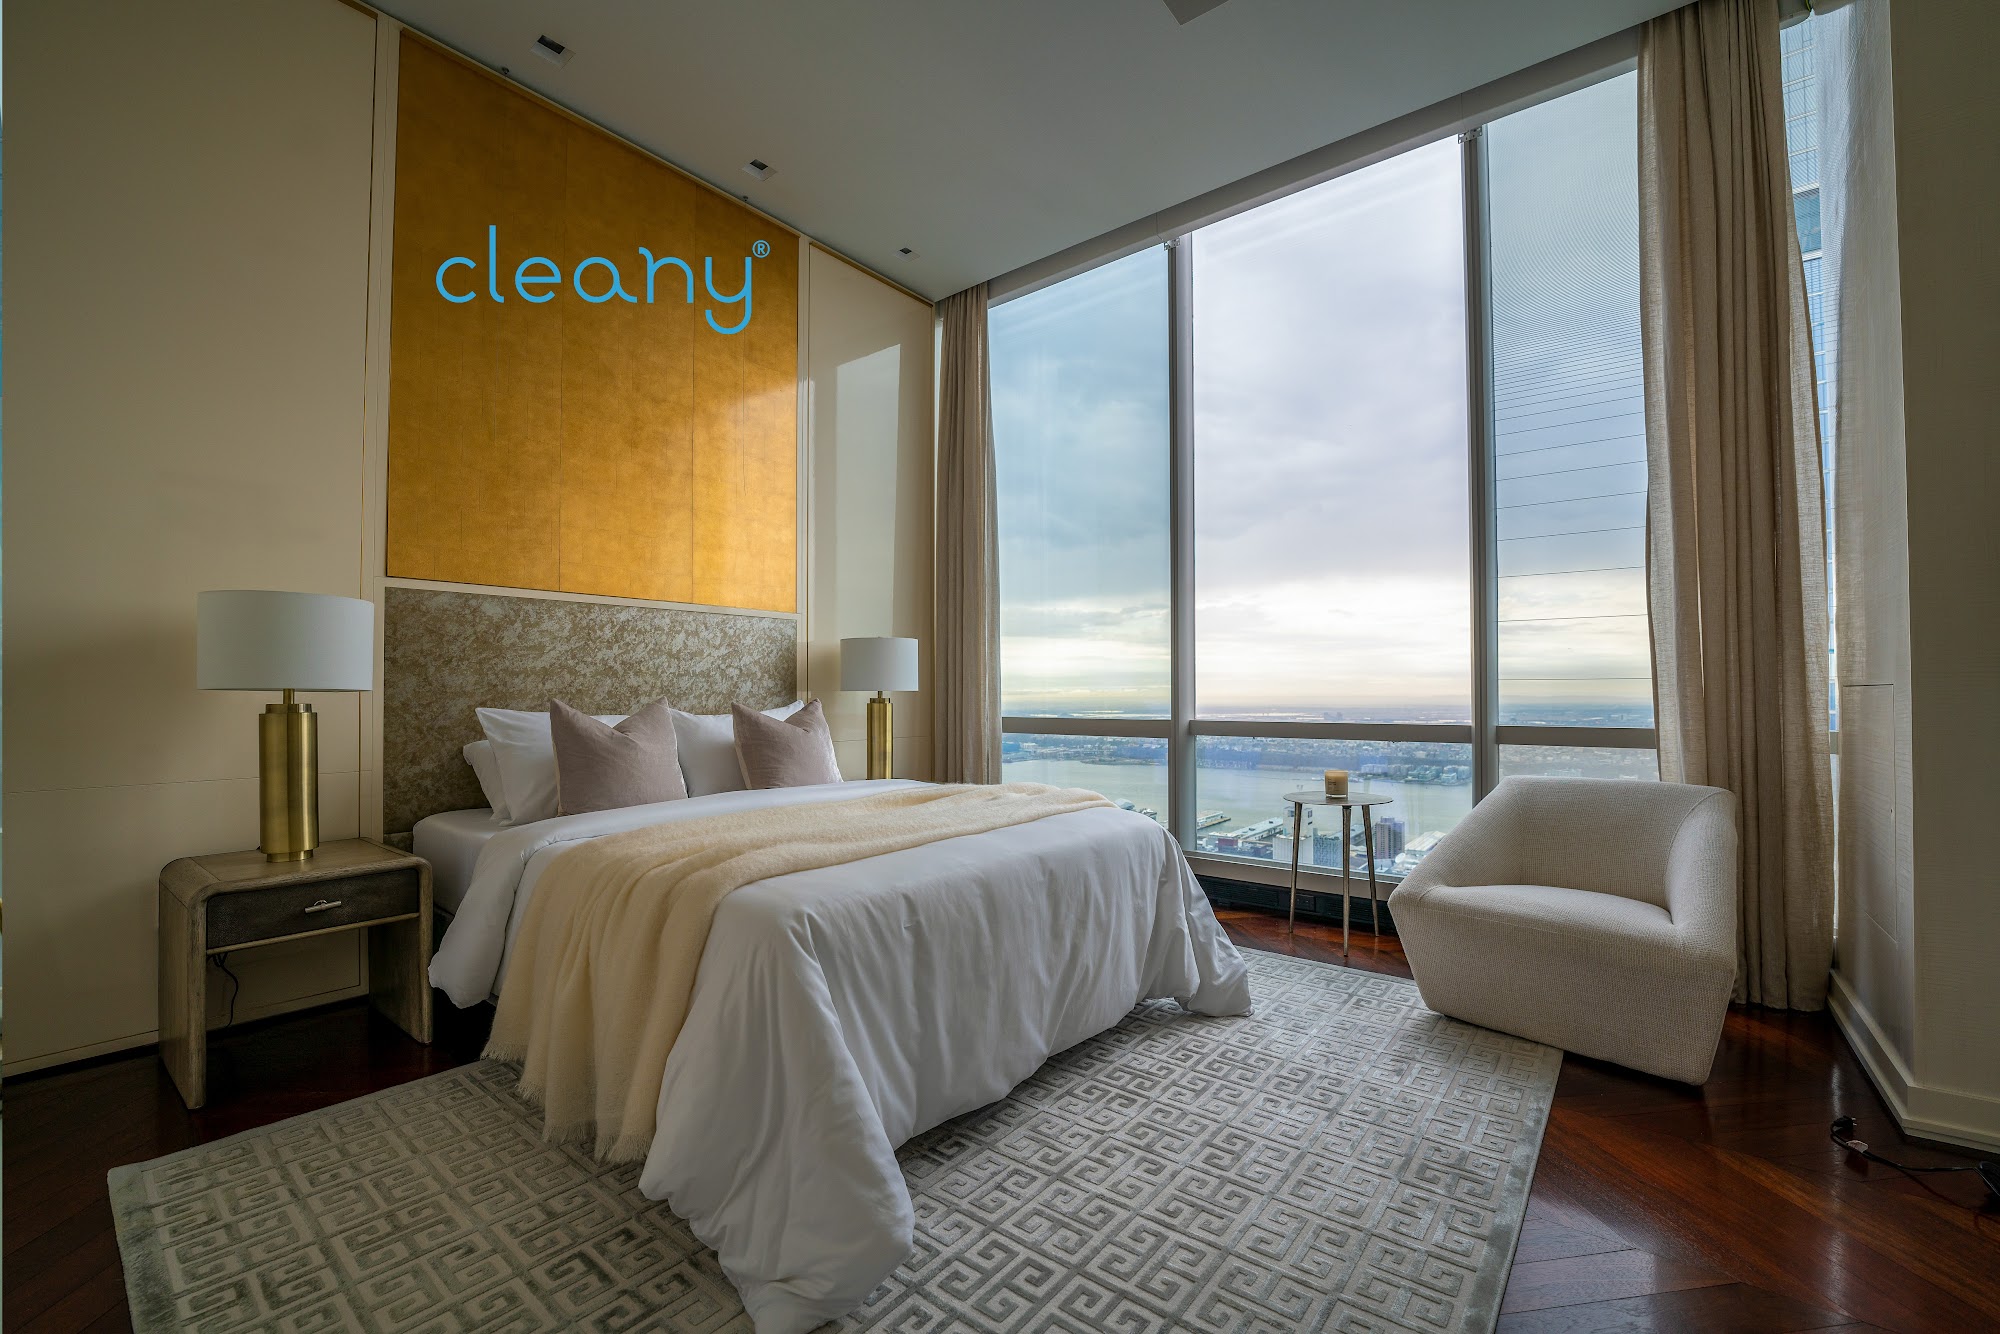 Cleany Miami Cleaning Service